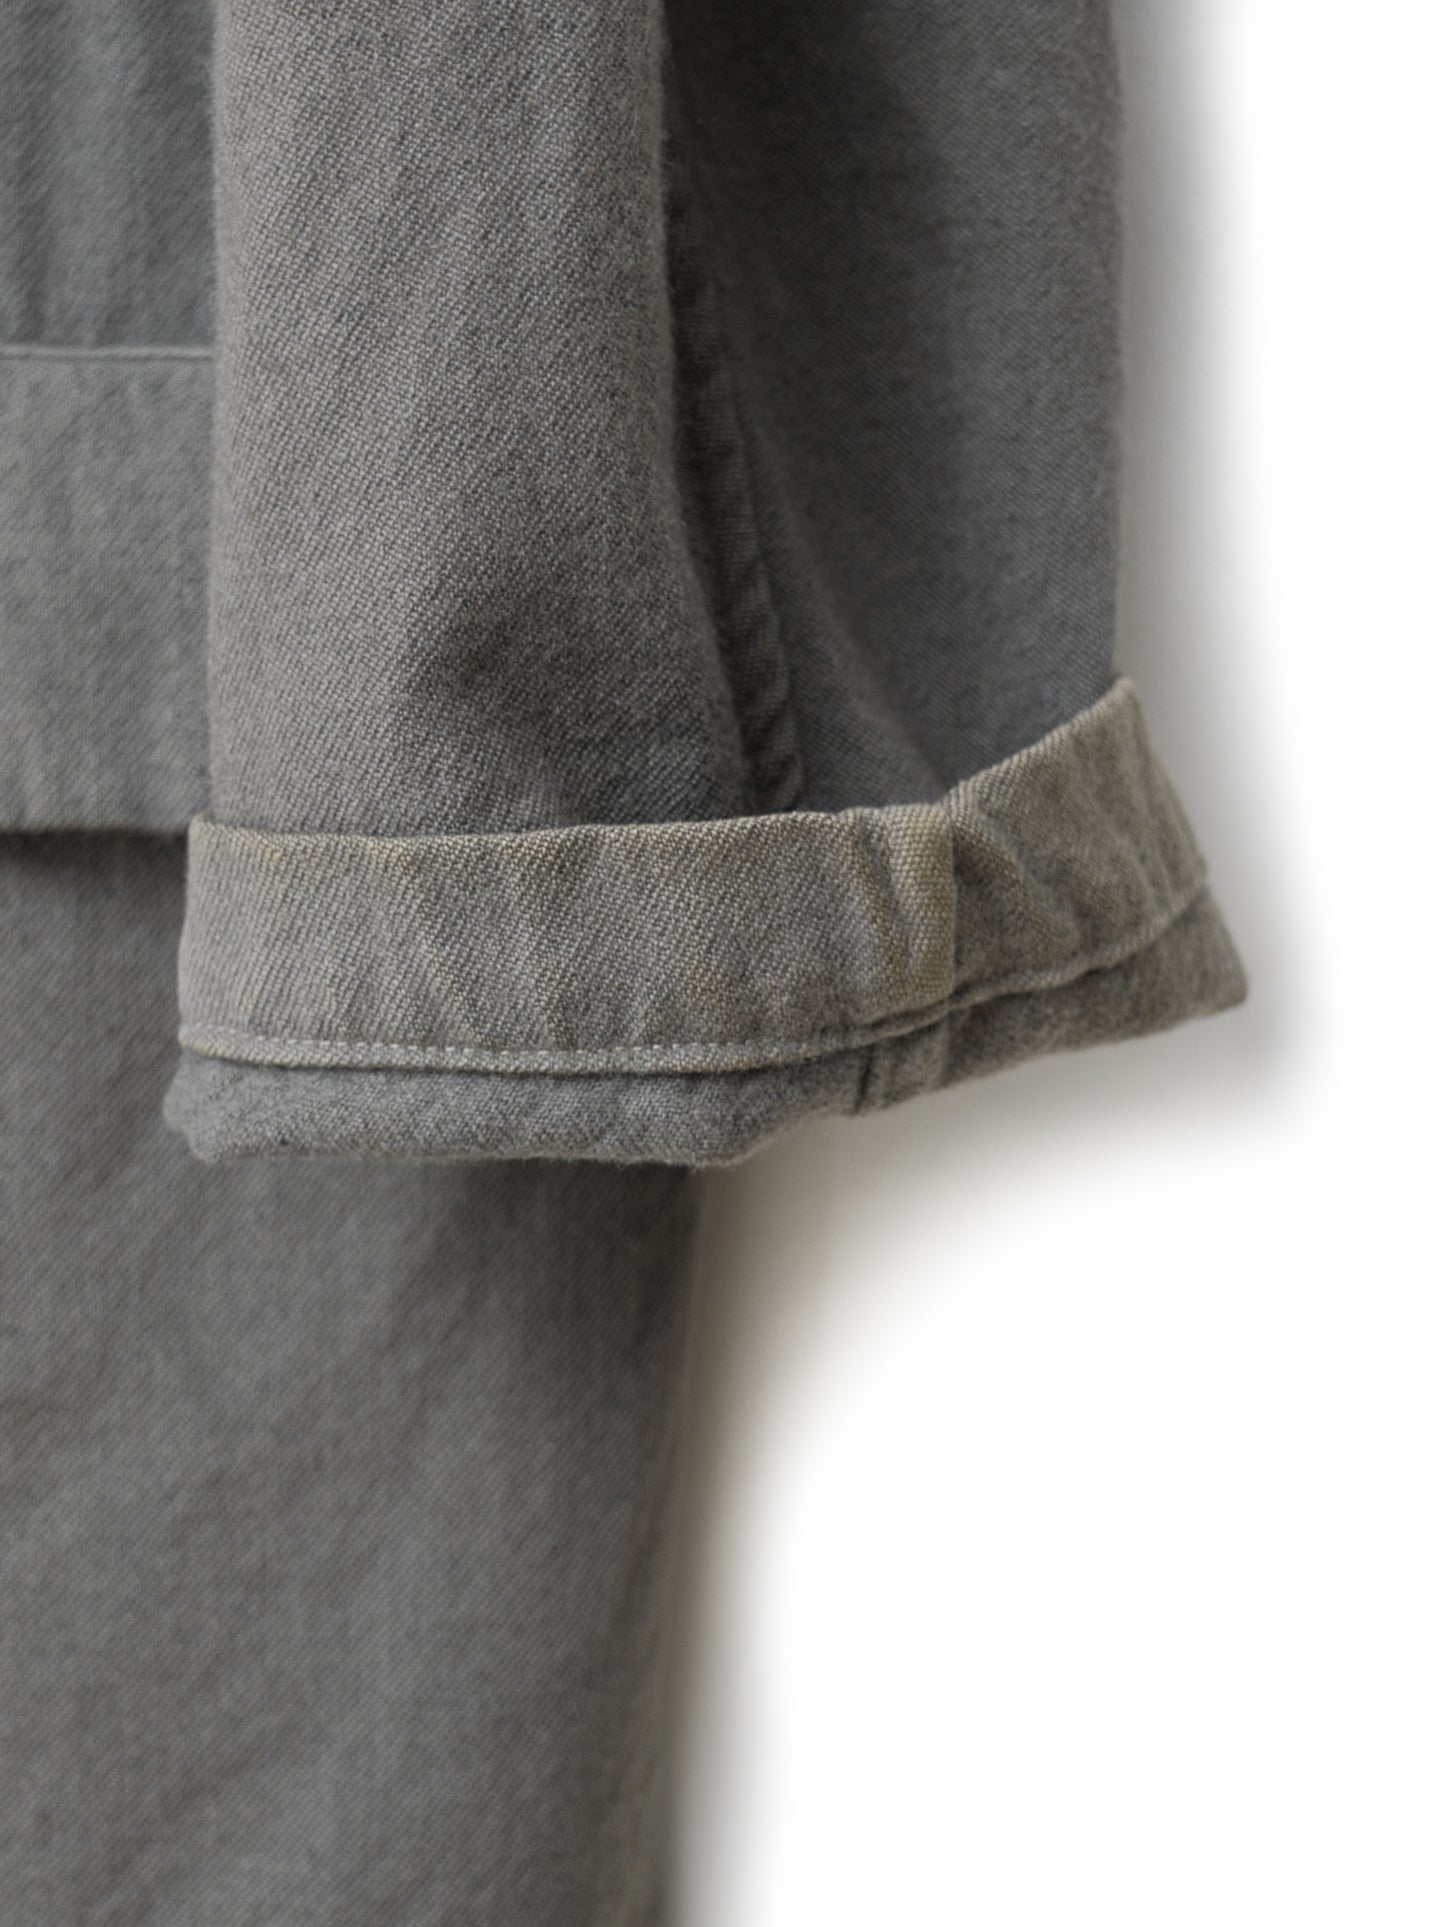 a/w 03 garment dyed tailored jacket ash ∙ wool ∙ small